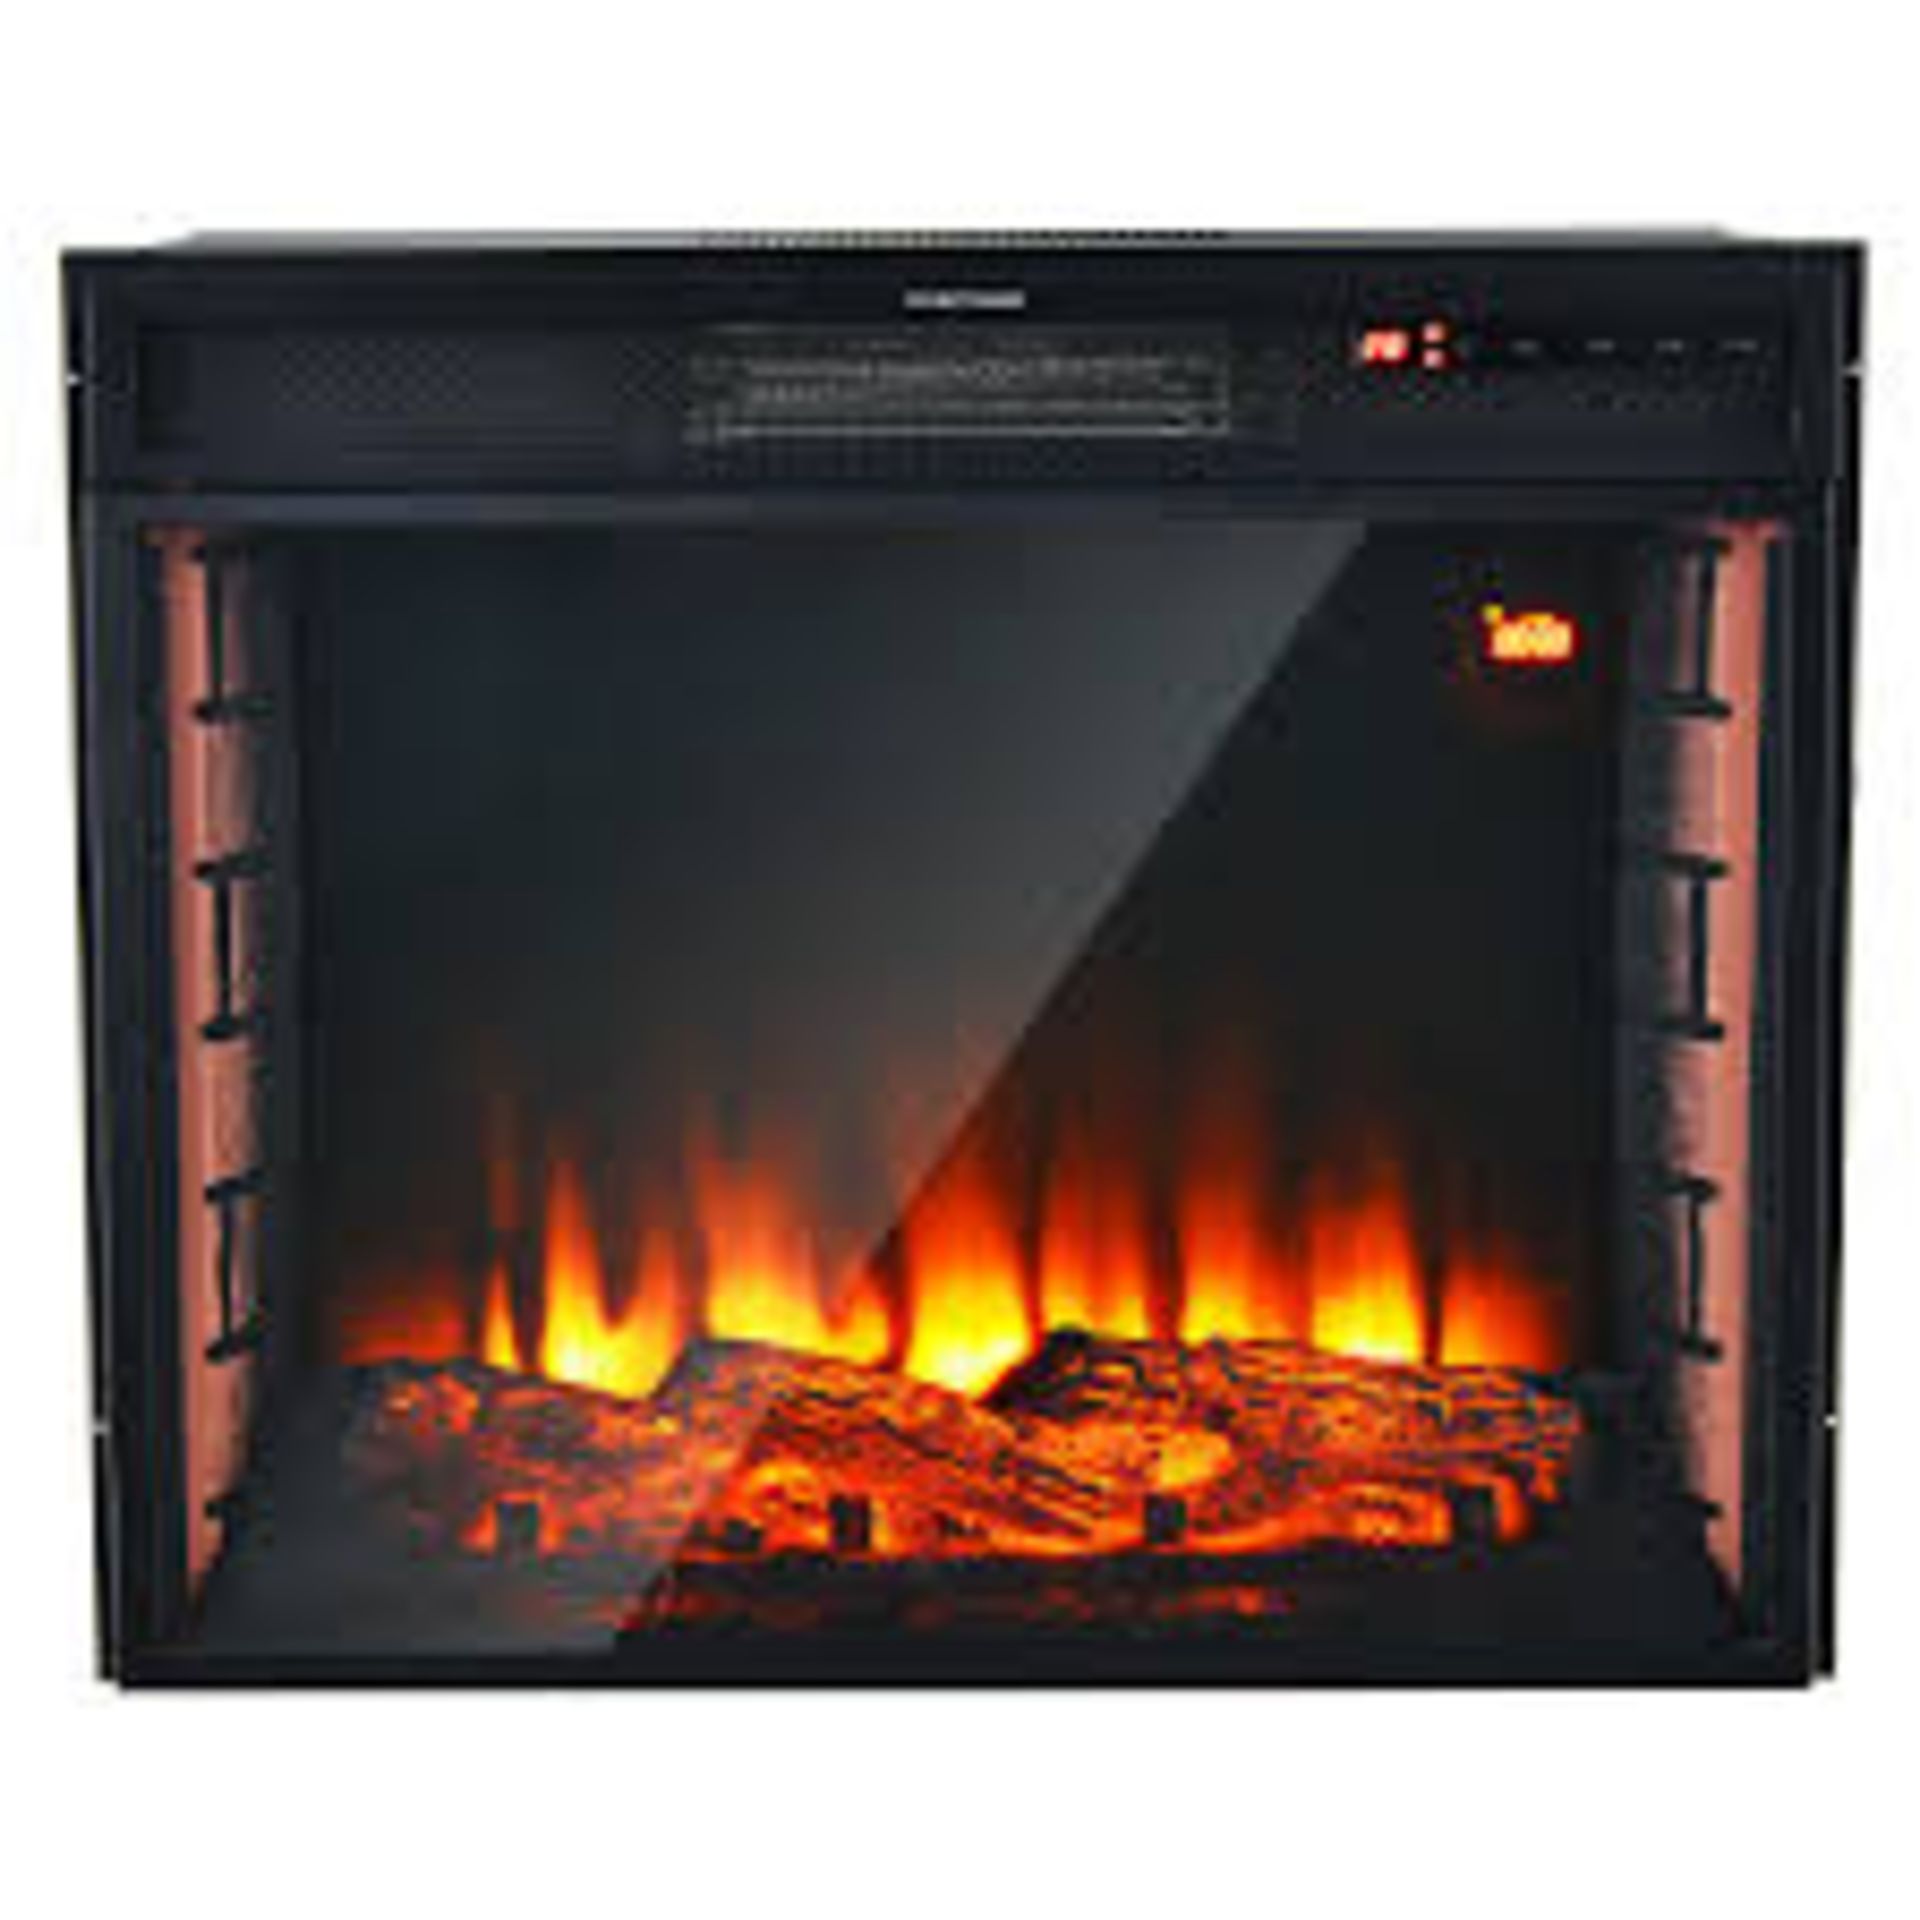 25” Recessed Electric Fireplace 2000W Wall Mounted Fire Heater. -R13a.4.